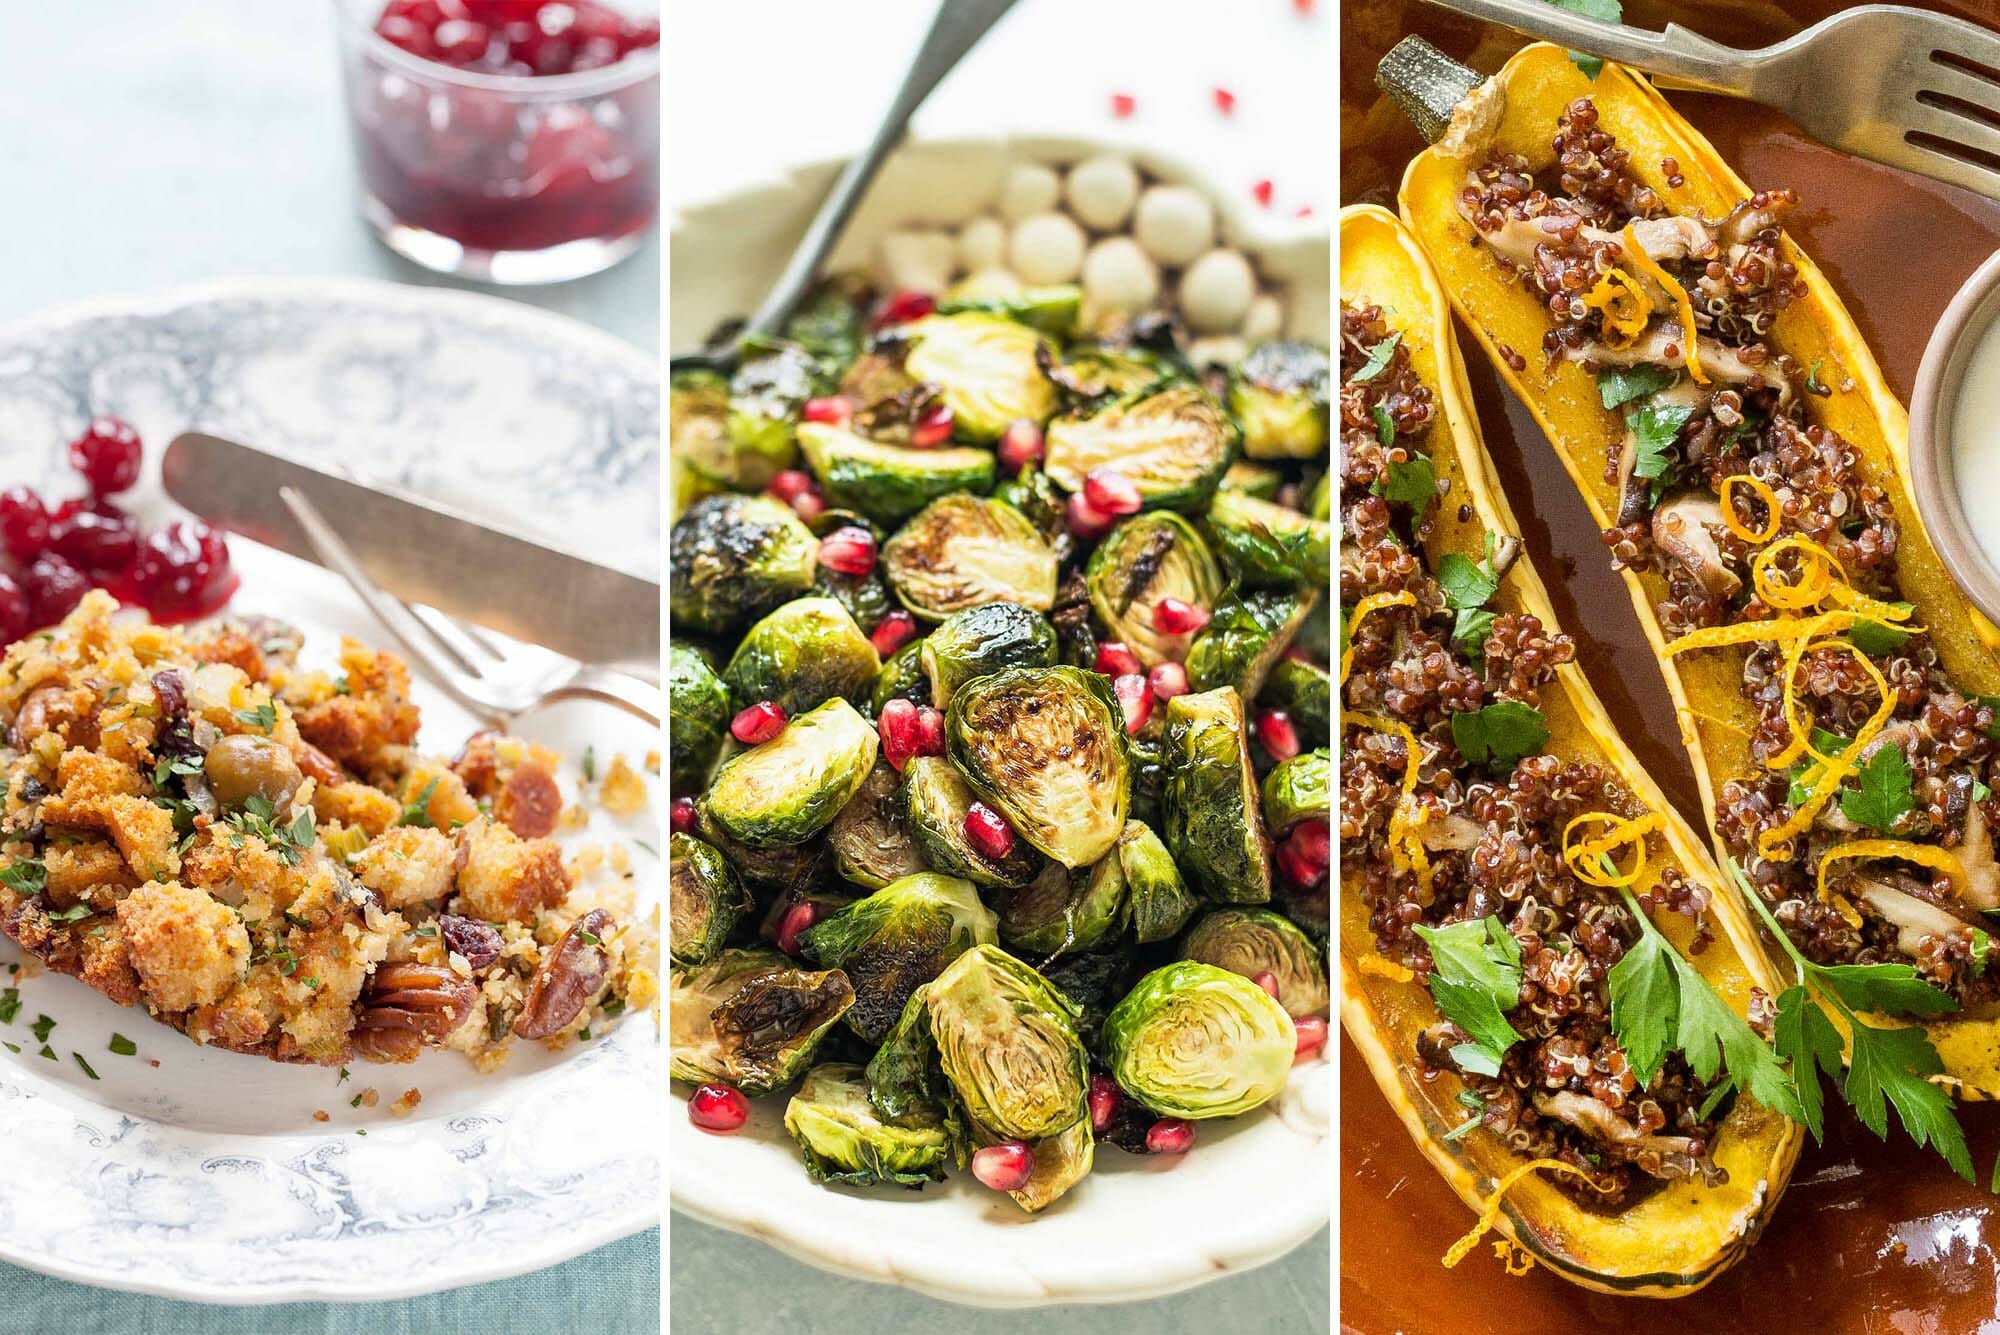 Three images side by side. On the left is a plate of Cornbread Stuffing with Green Olives and Pecans. In the center is a serving platter of Roasted Brussels Sprouts with Pomegranate-Balsamic Glaze. On the right is Stuffed Delicata Squash with Quinoa and Mushrooms.